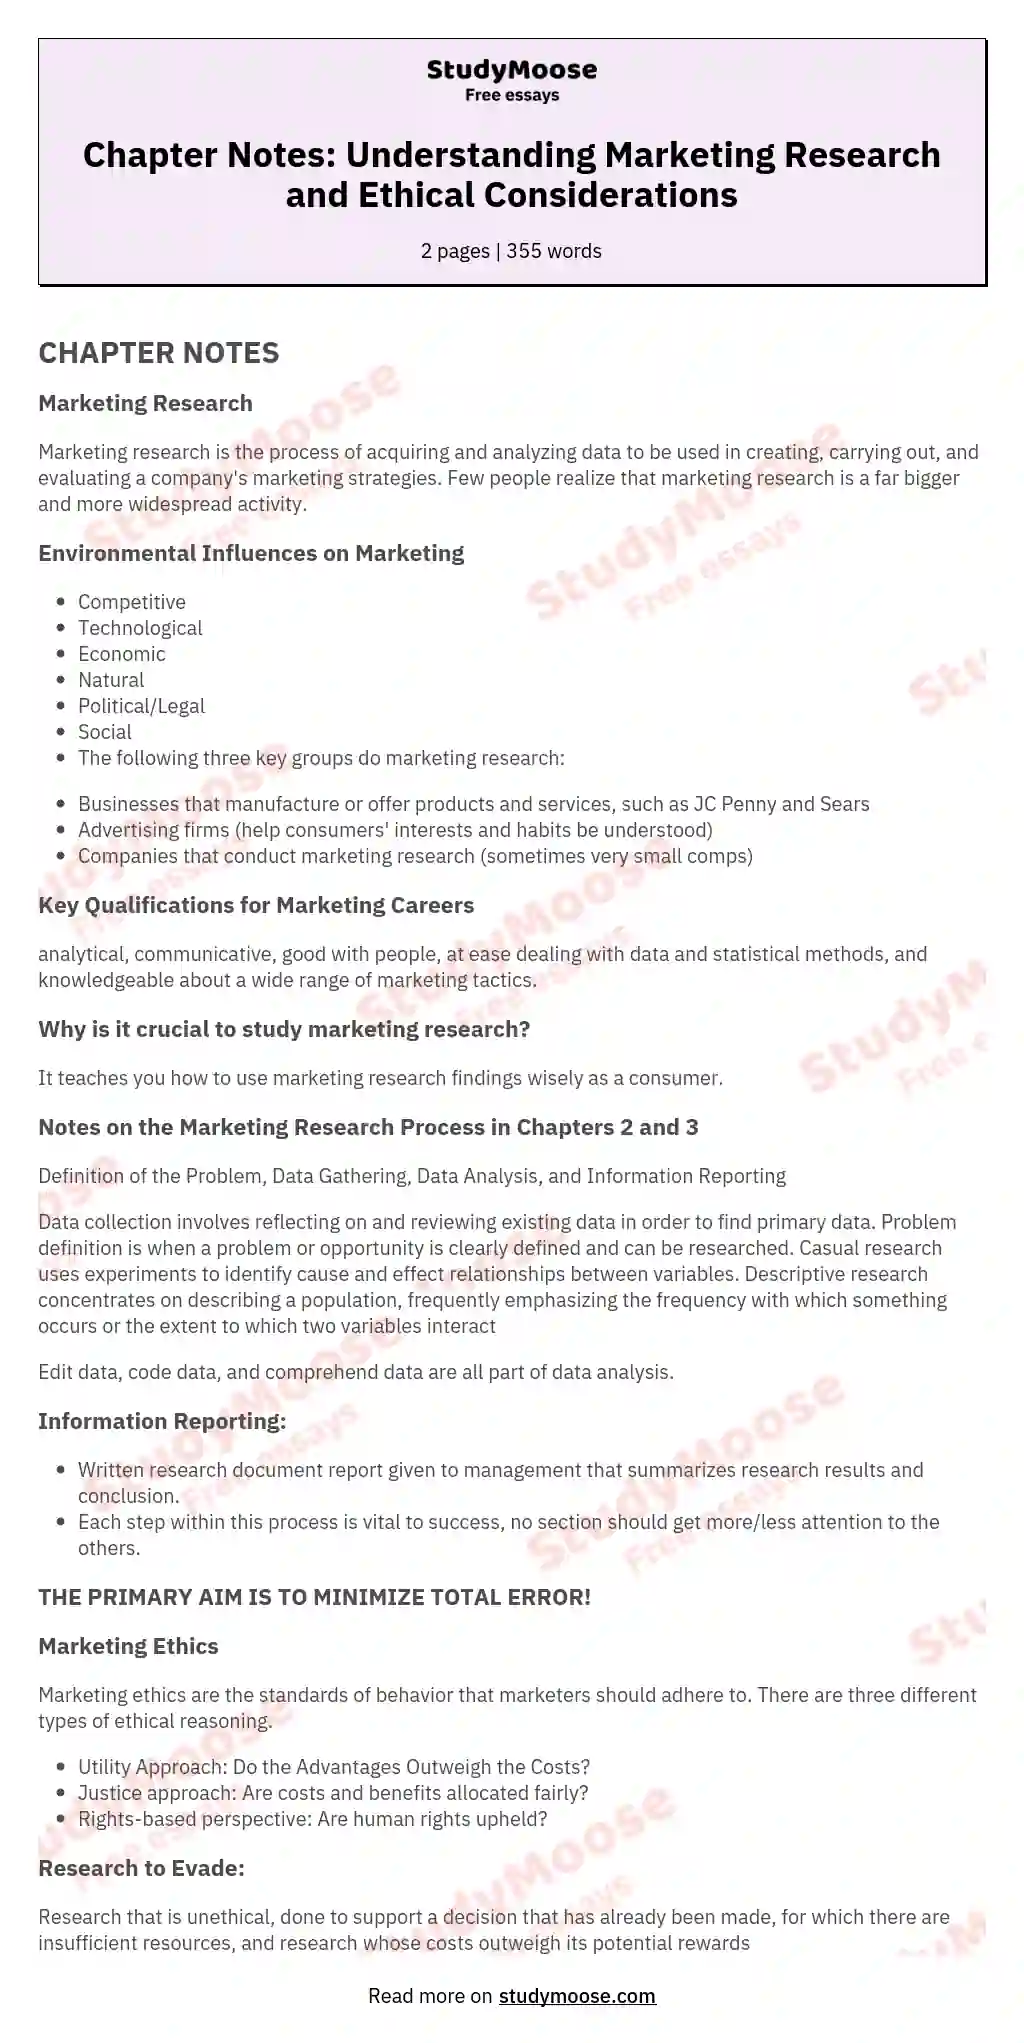 Chapter Notes: Understanding Marketing Research and Ethical Considerations essay